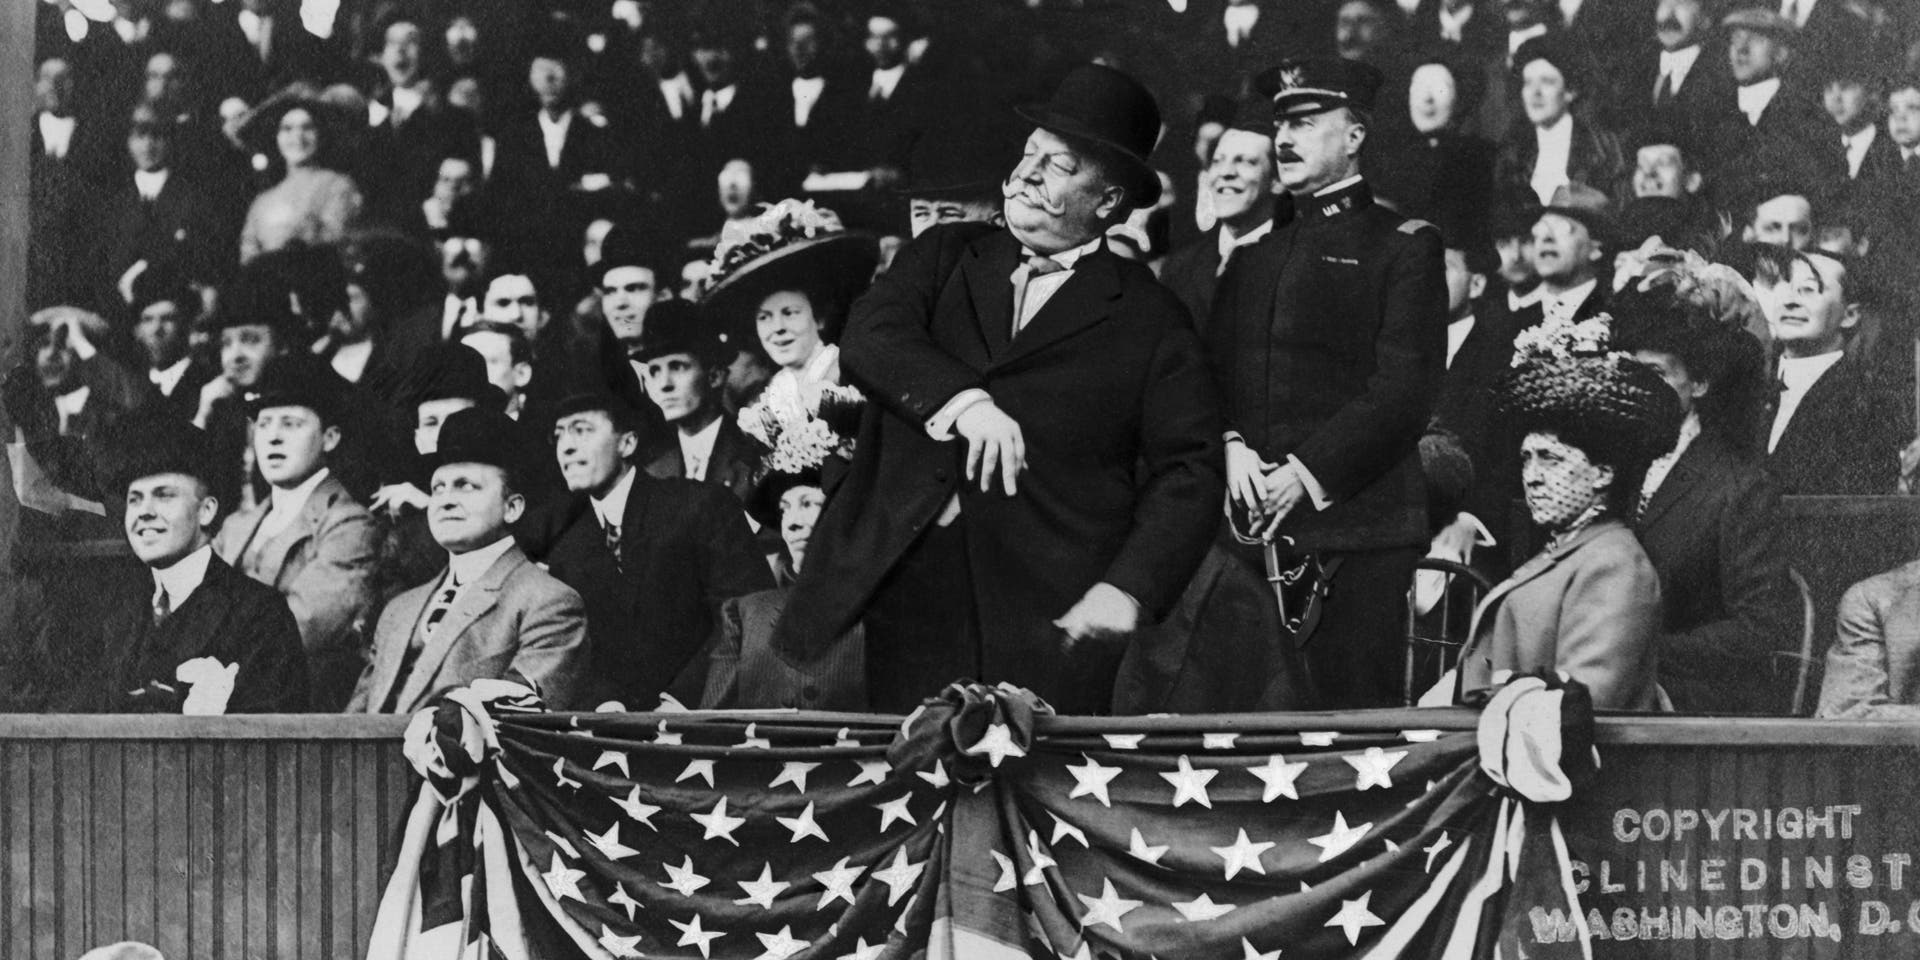 In this circa-1910 image, President William Howard Taft throws out the first pitch at a Major League Baseball Game.